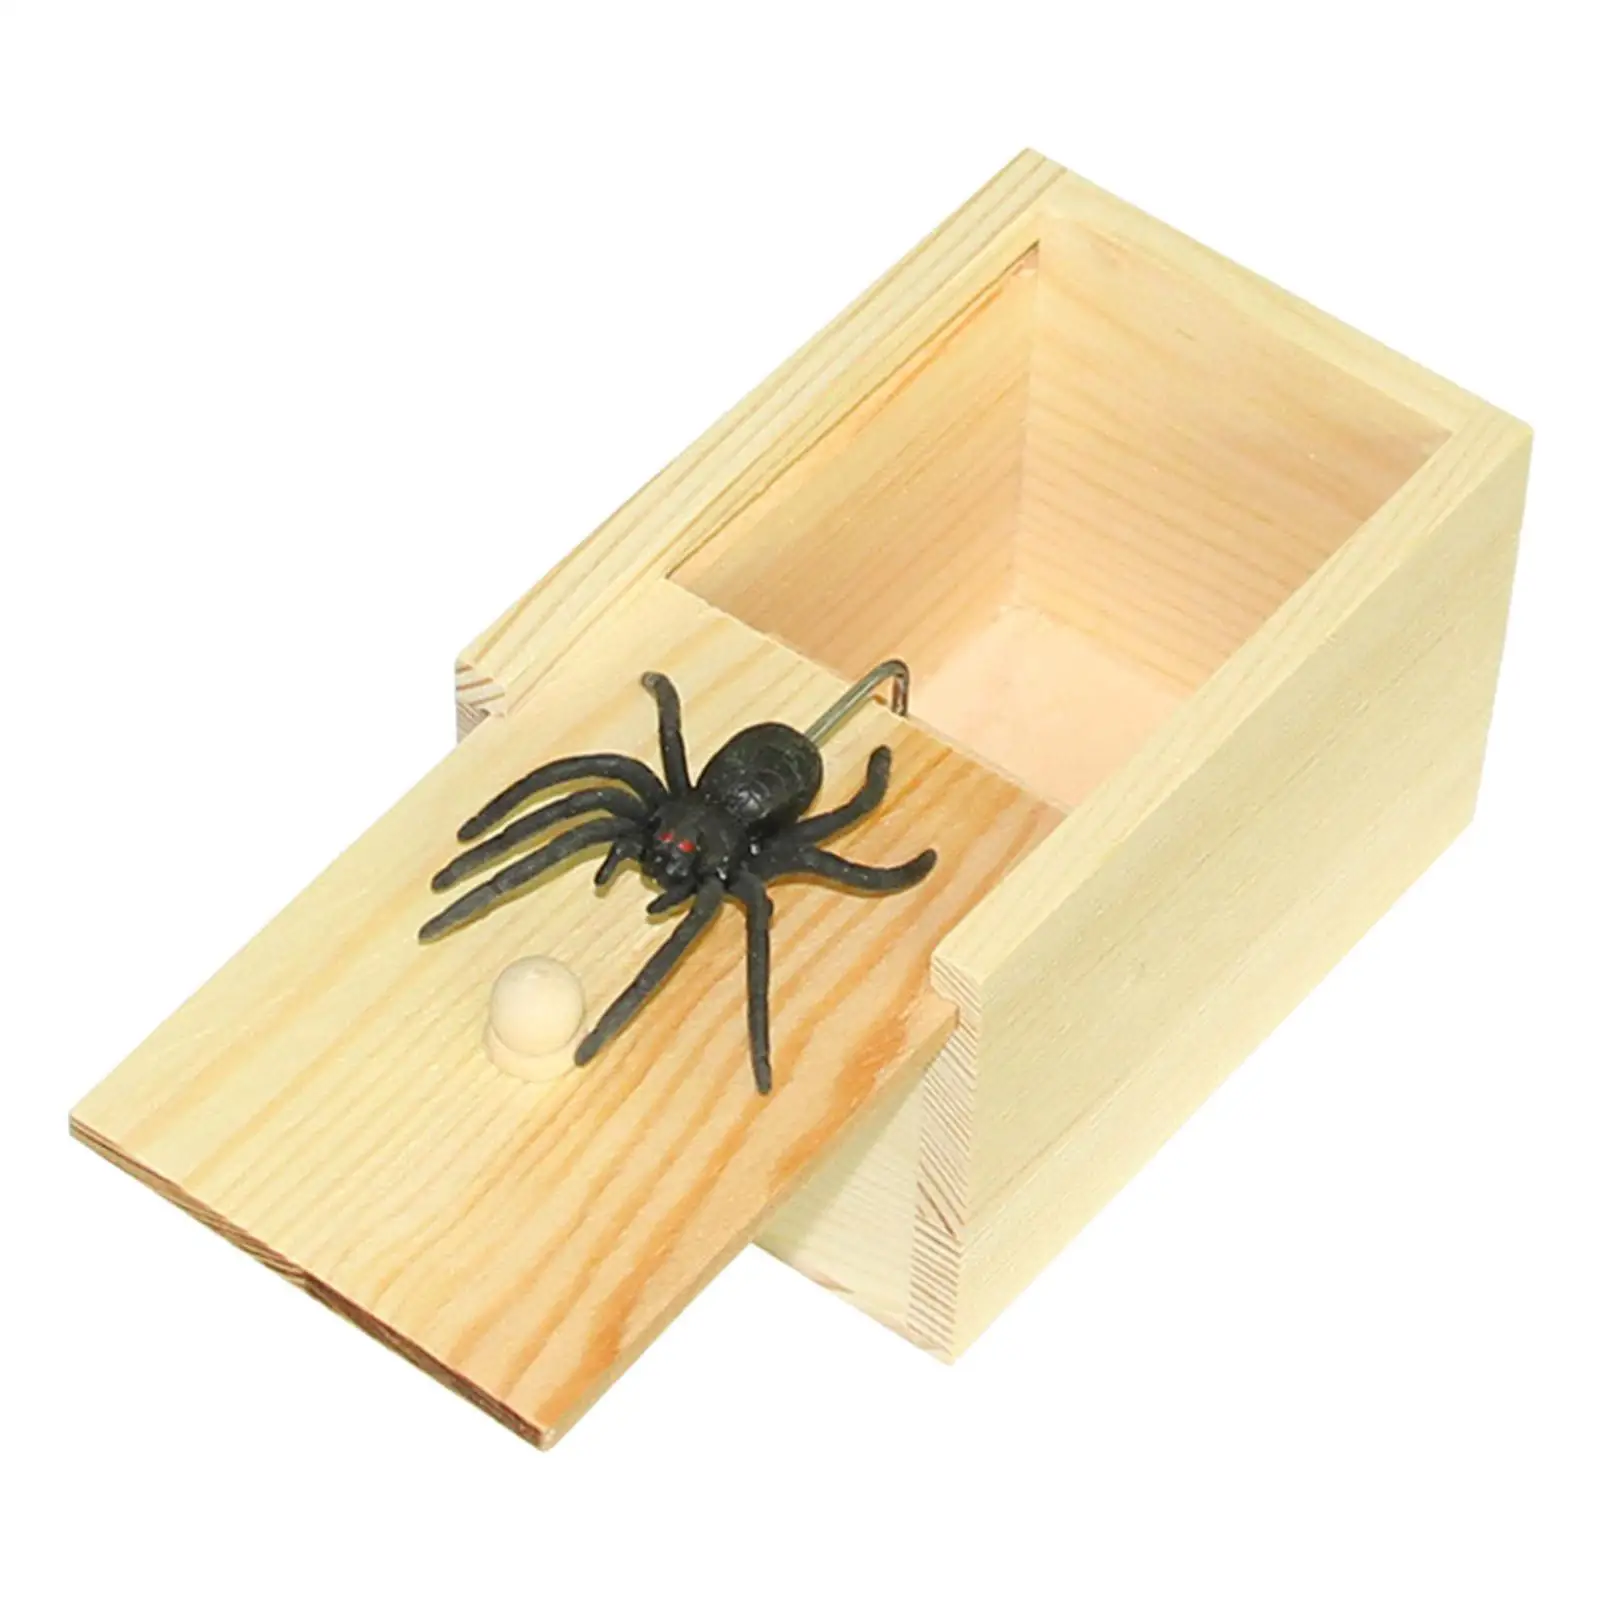 Spider Prank Scare Box Practical Joke Toys Tricky Toy Handmade Fun Practical Joke Boxes for Halloween Carnivals Adults Gifts